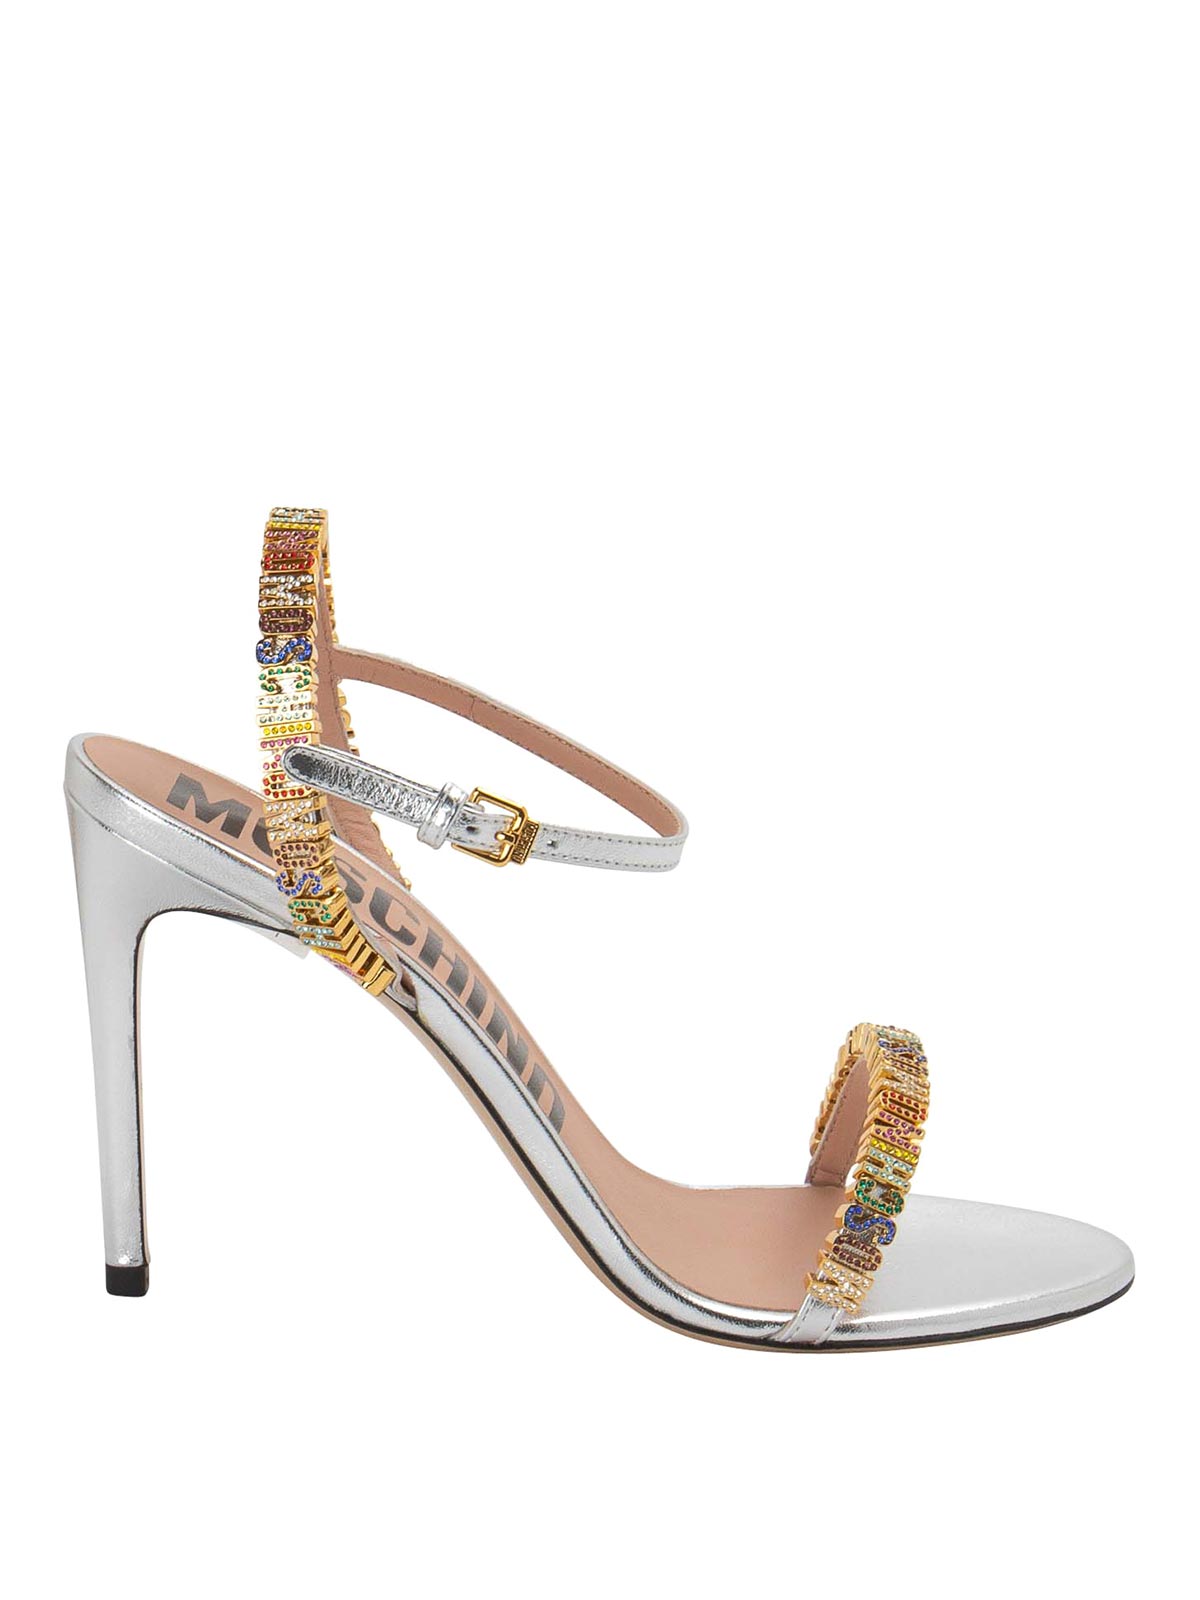 Moschino Leather Sandals In Metallic